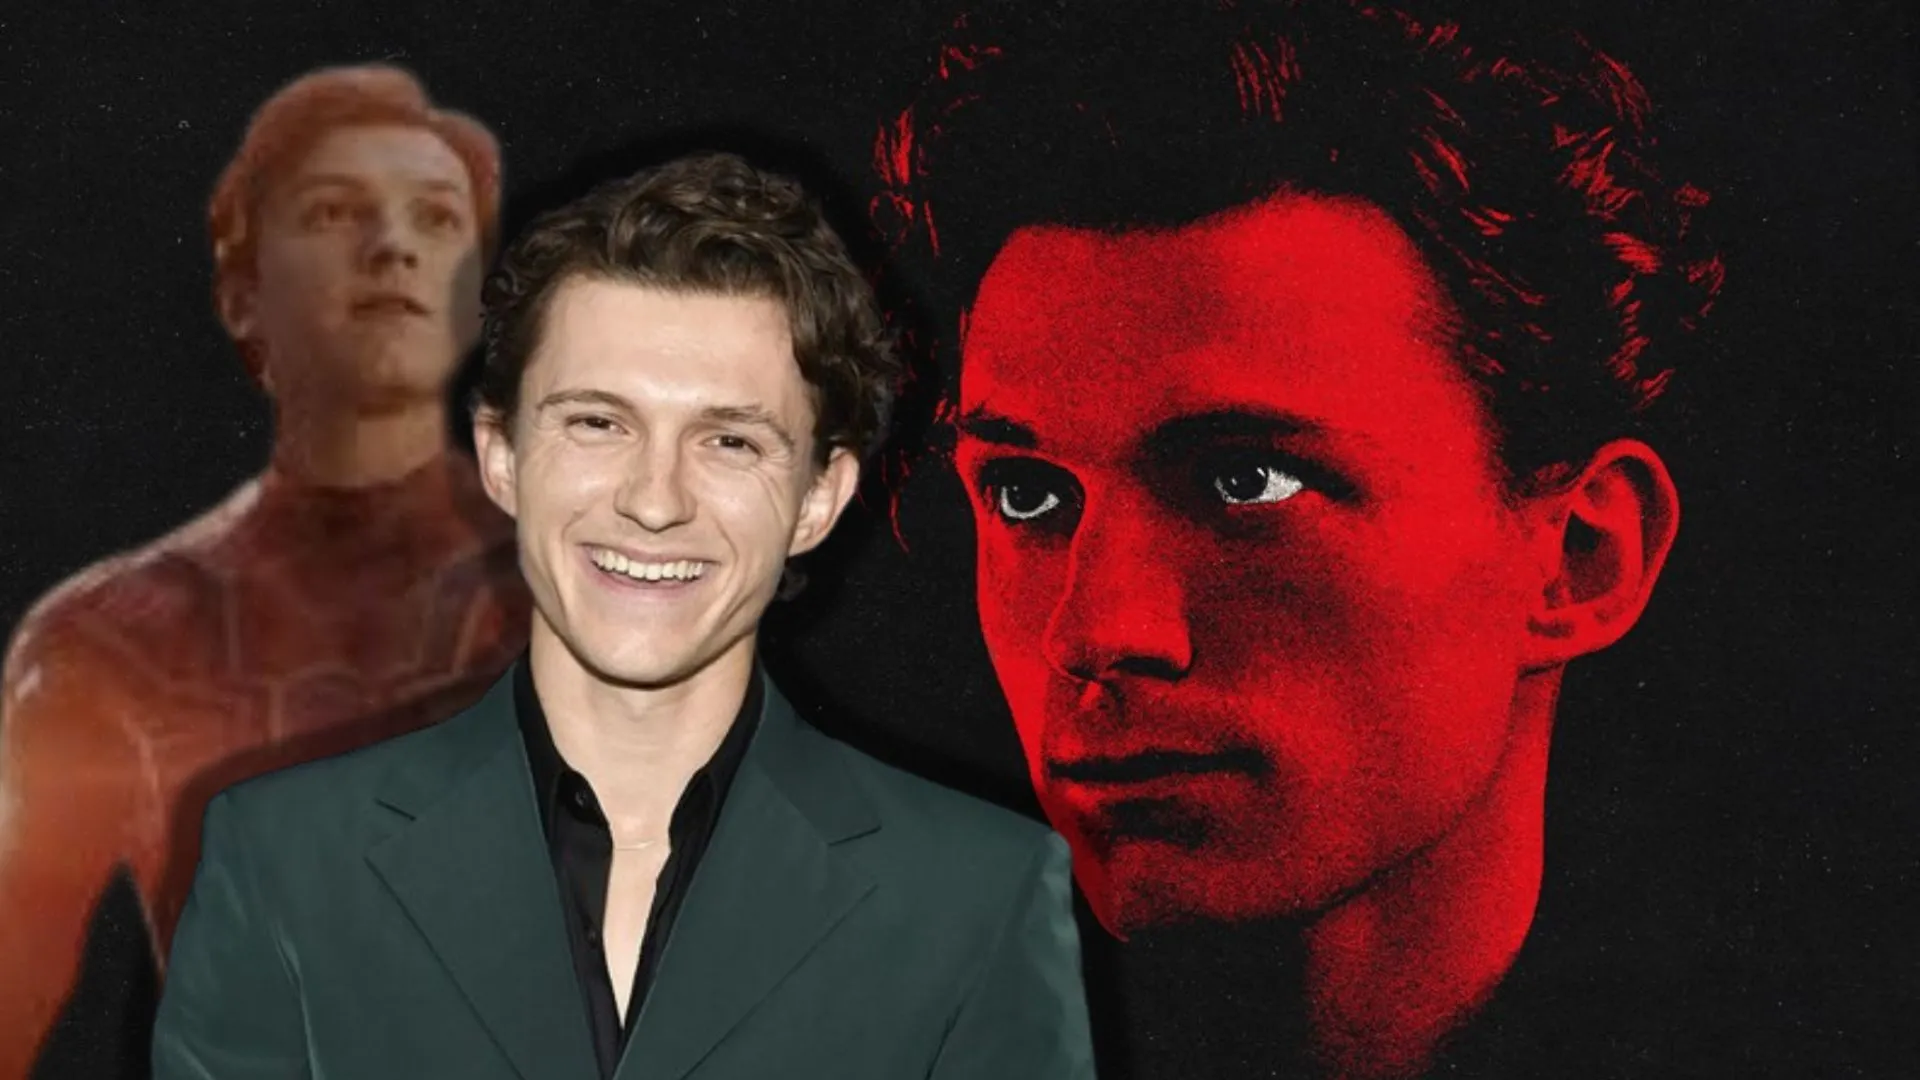 Tom Holland to Star in London’s “Romeo & Juliet”